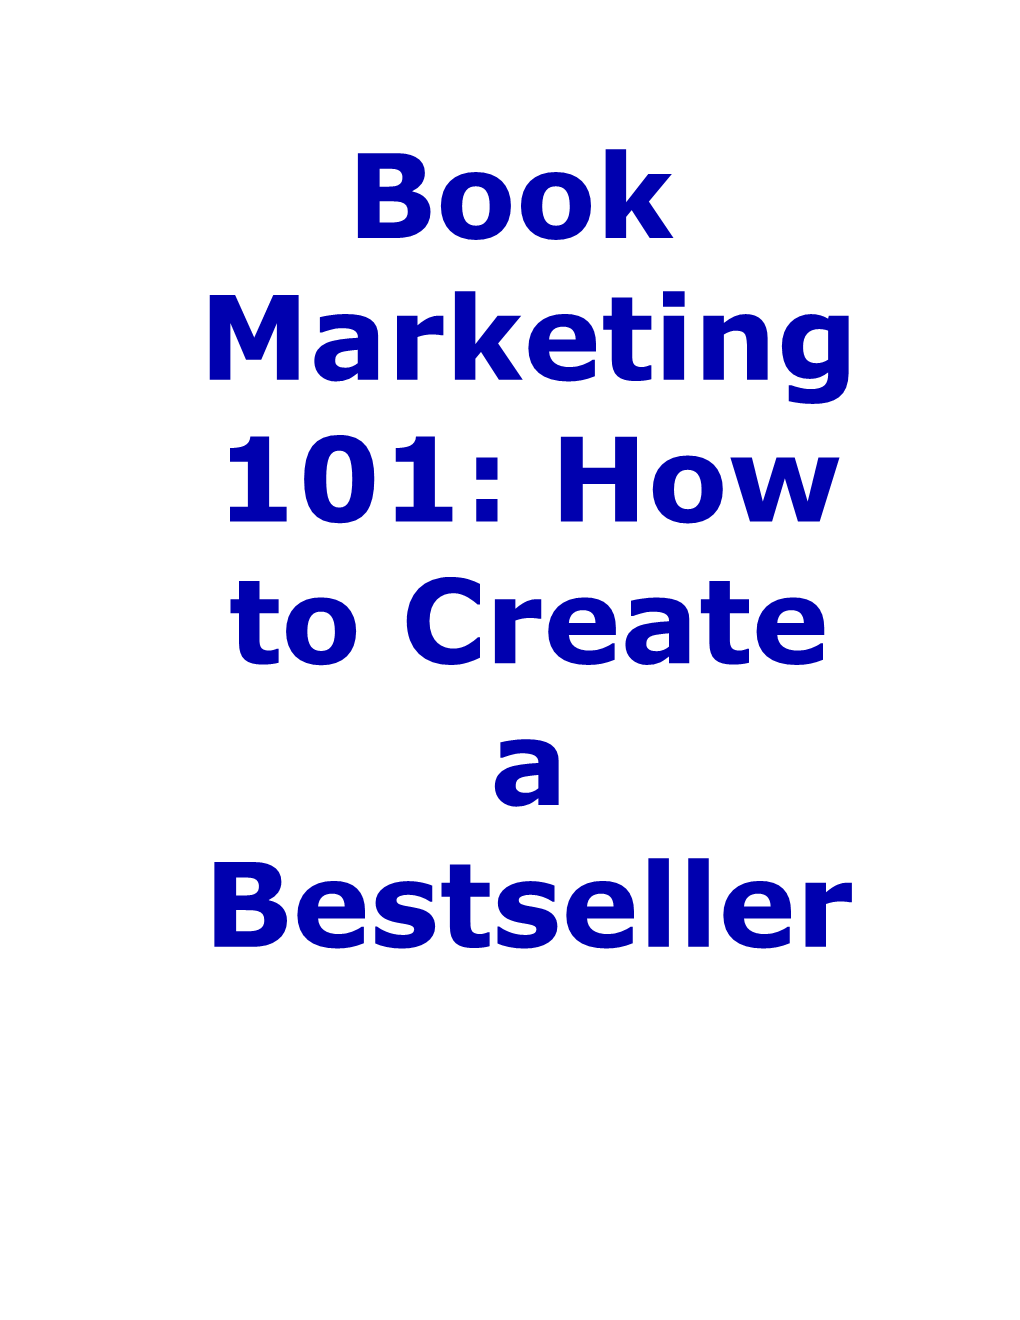 Creating Bestsellers: Questions & Answers